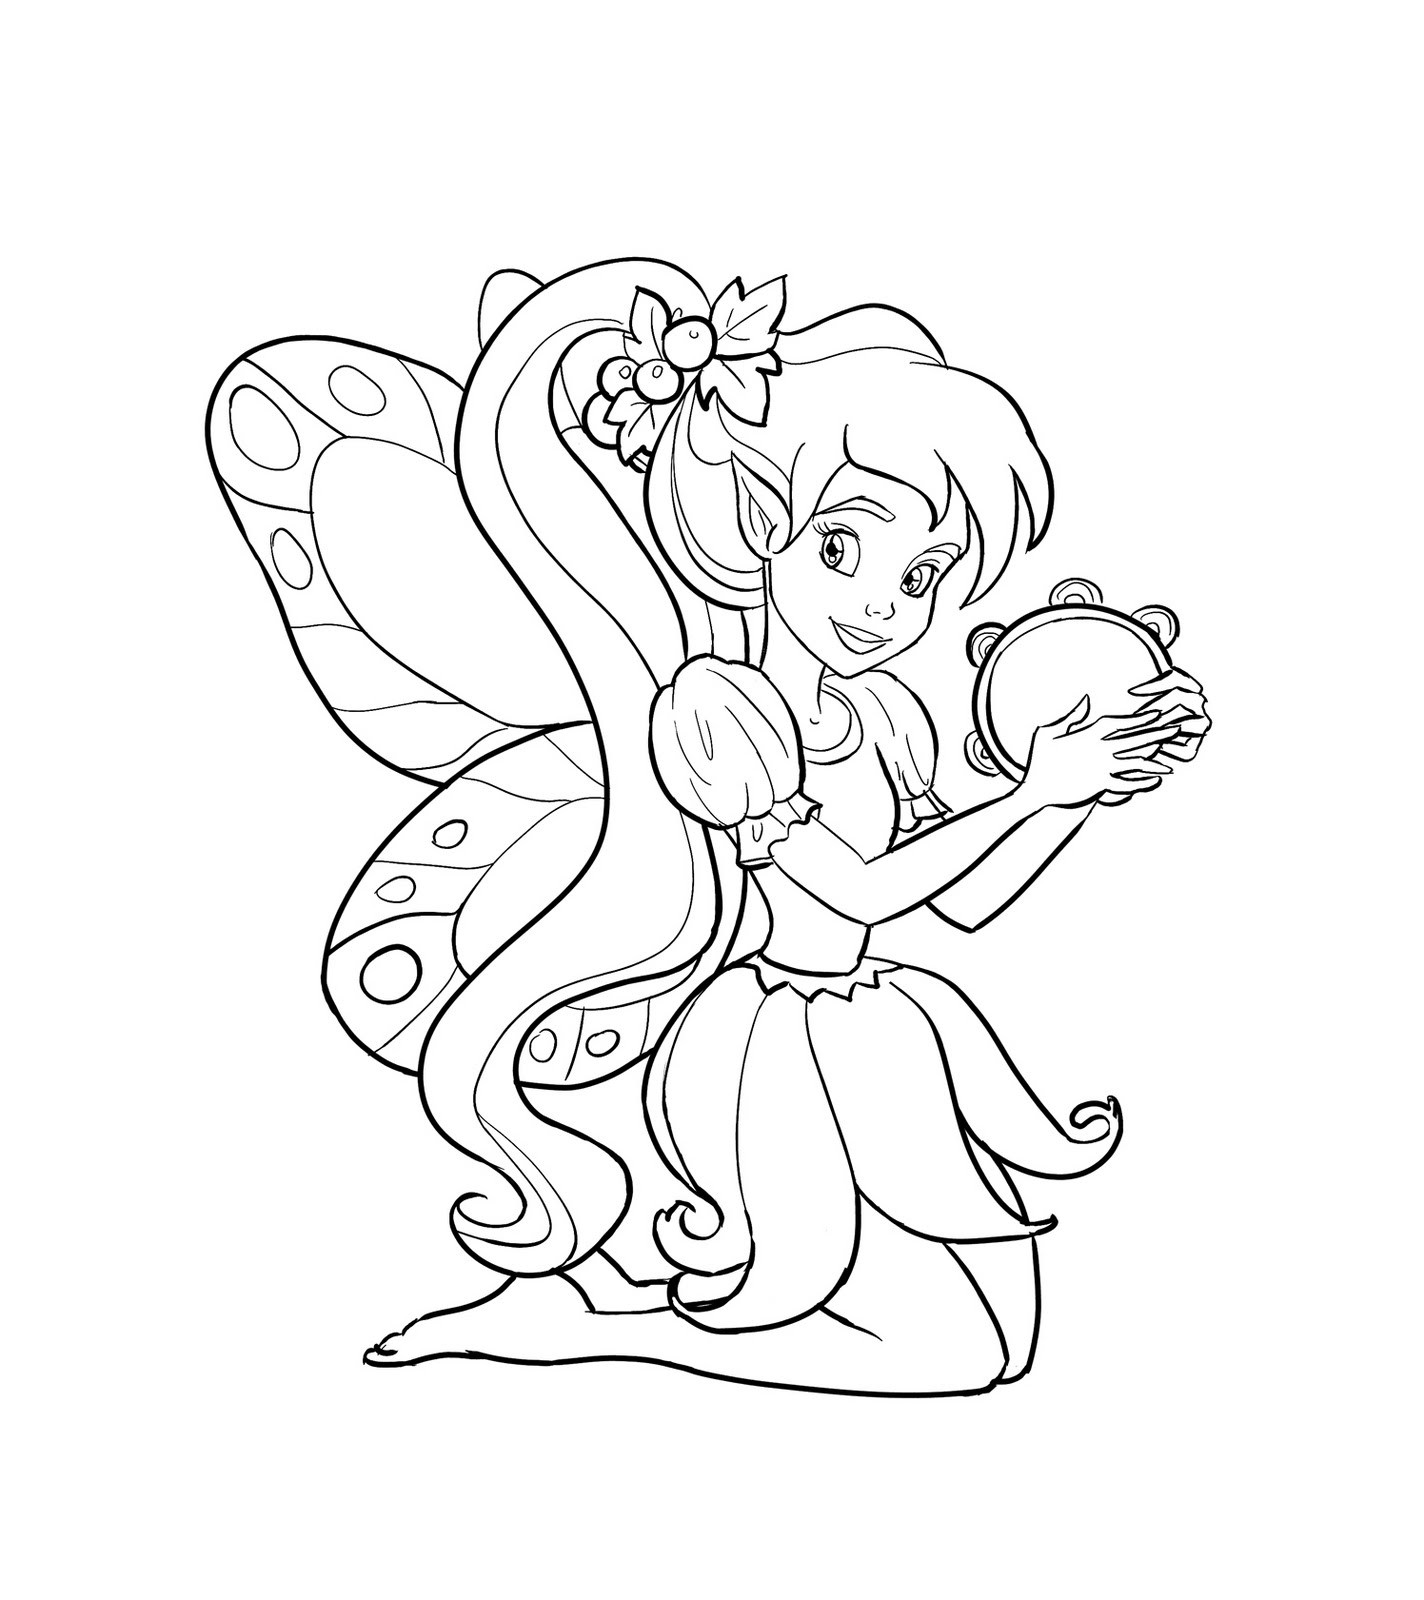 Printable Fairies Coloring Pages
 Free Printable Fairy Coloring Pages For Kids